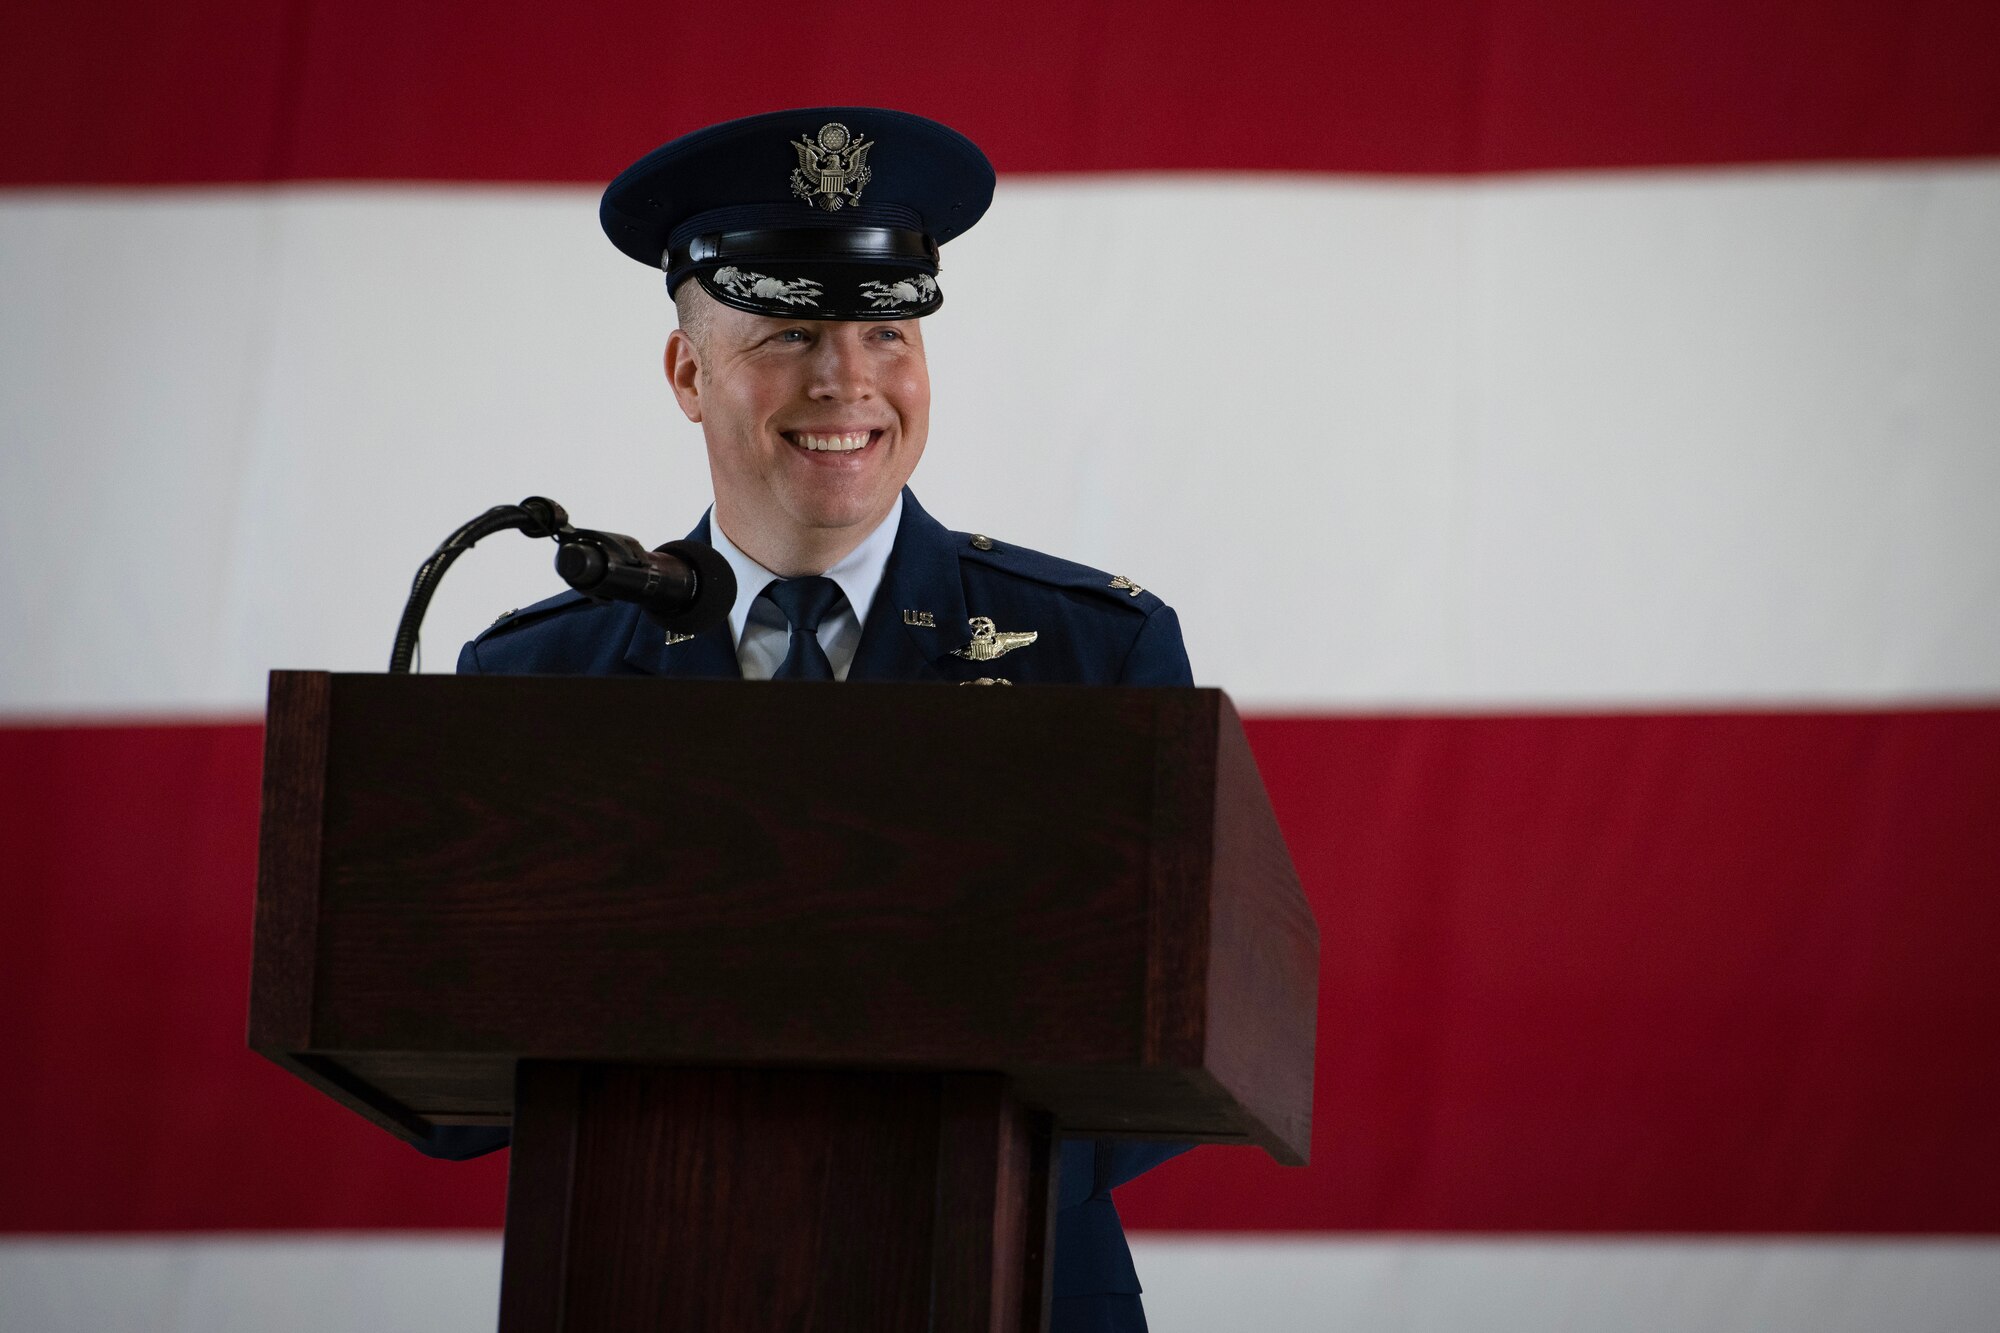 U.S. Air Force member provides remarks